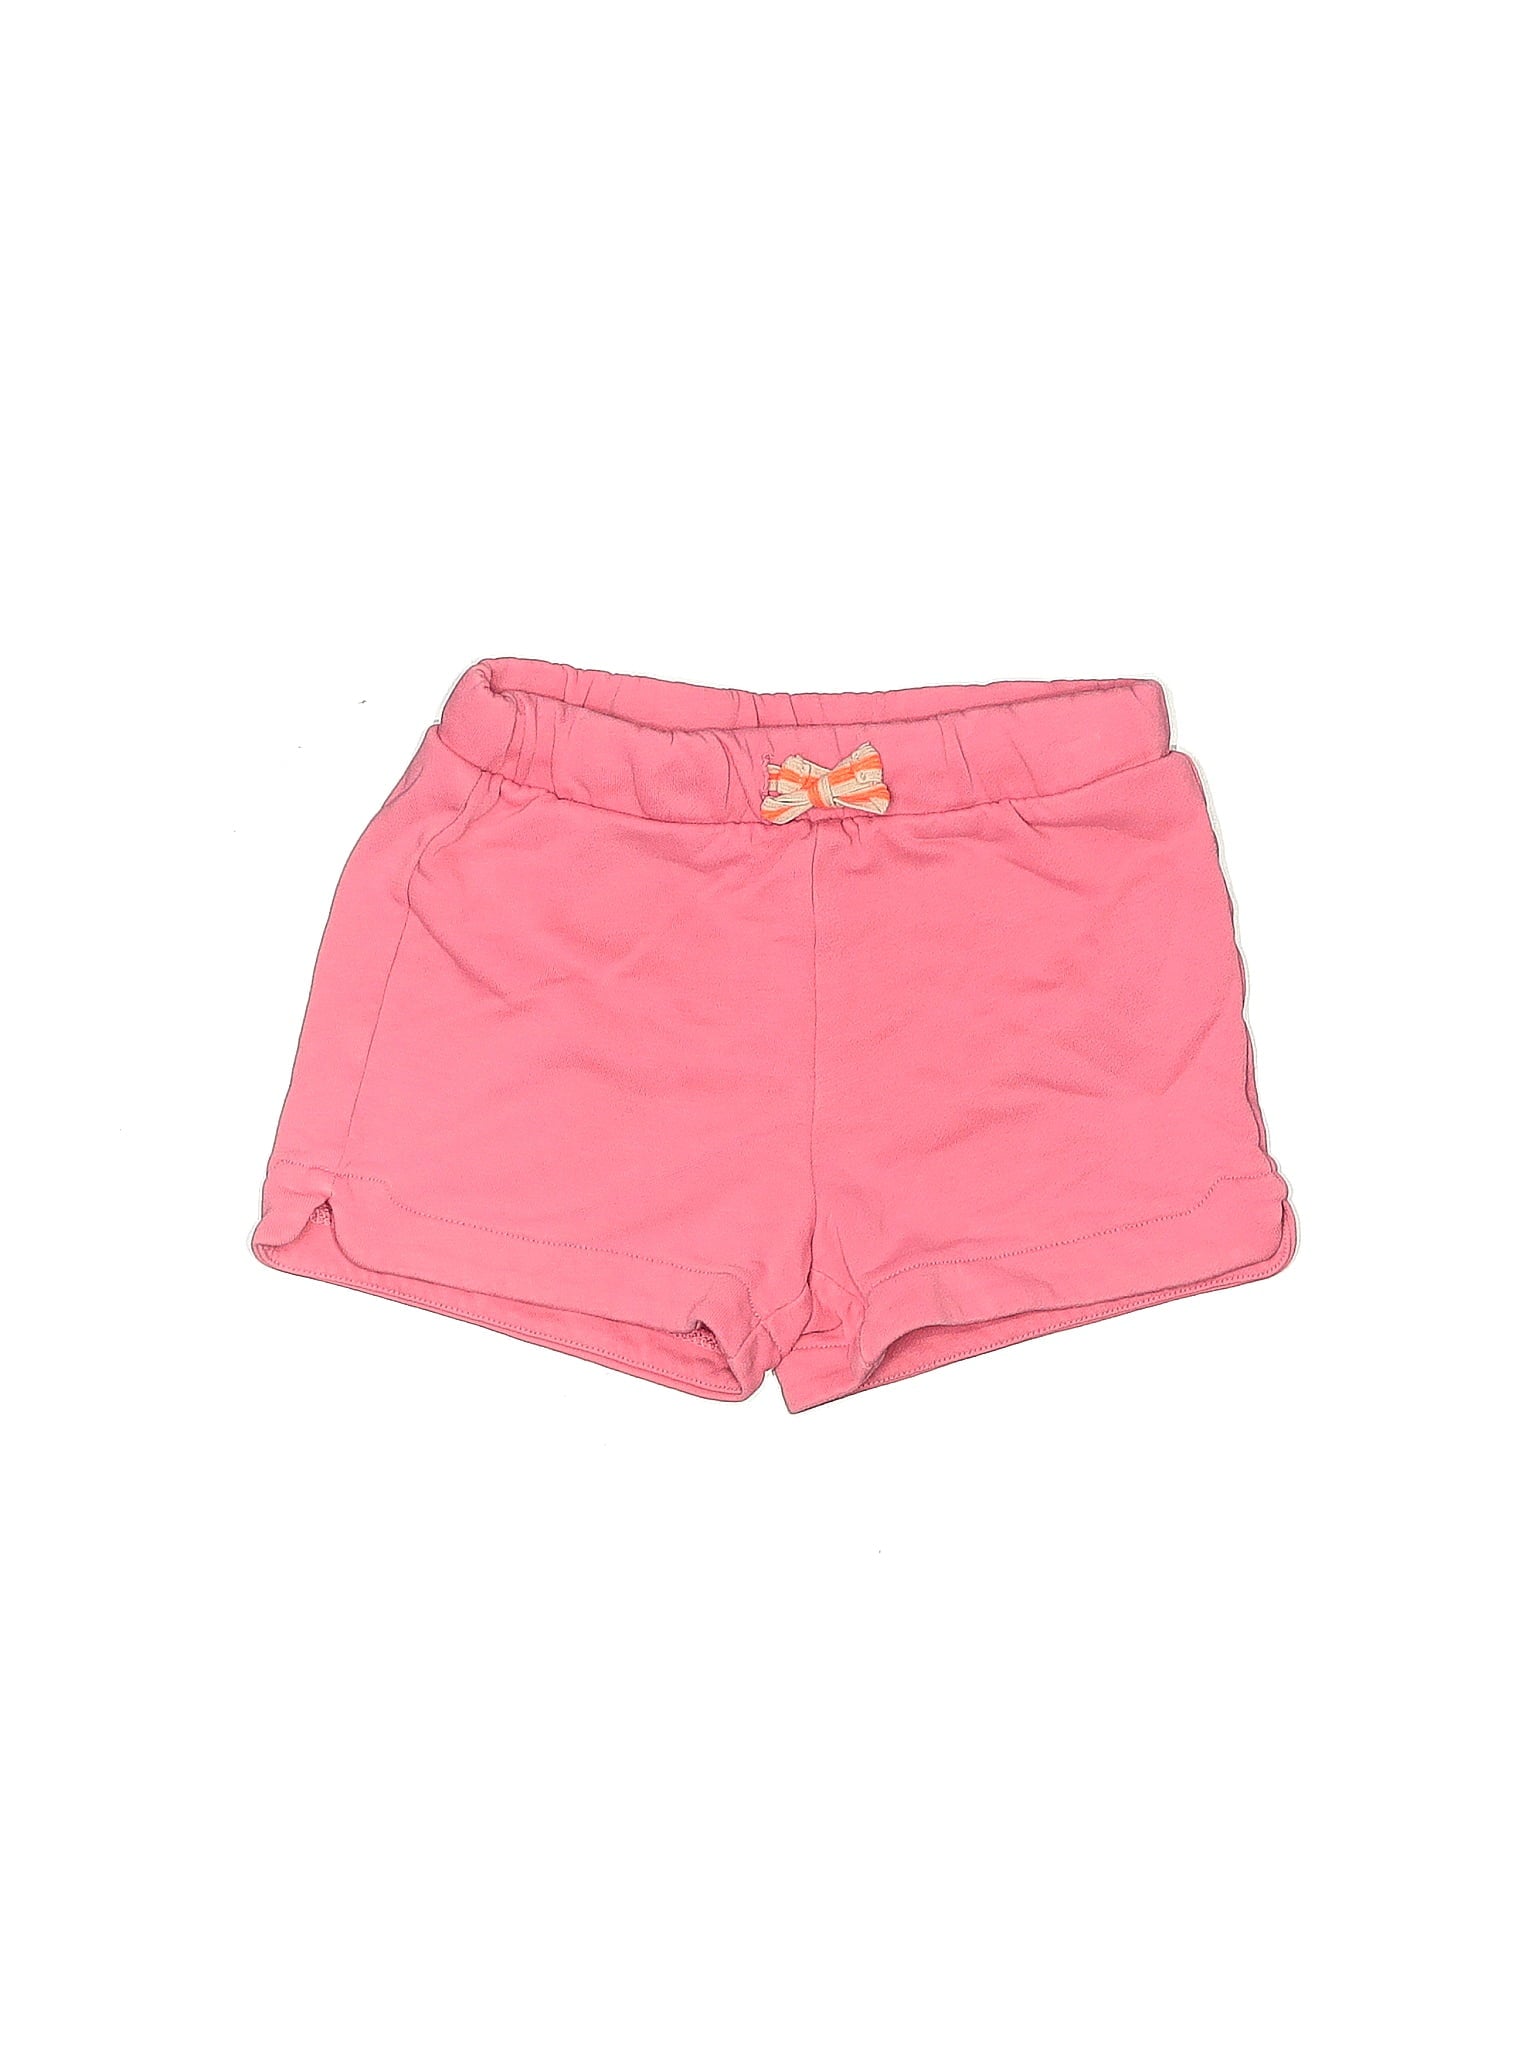 Shorts size - S (Youth)